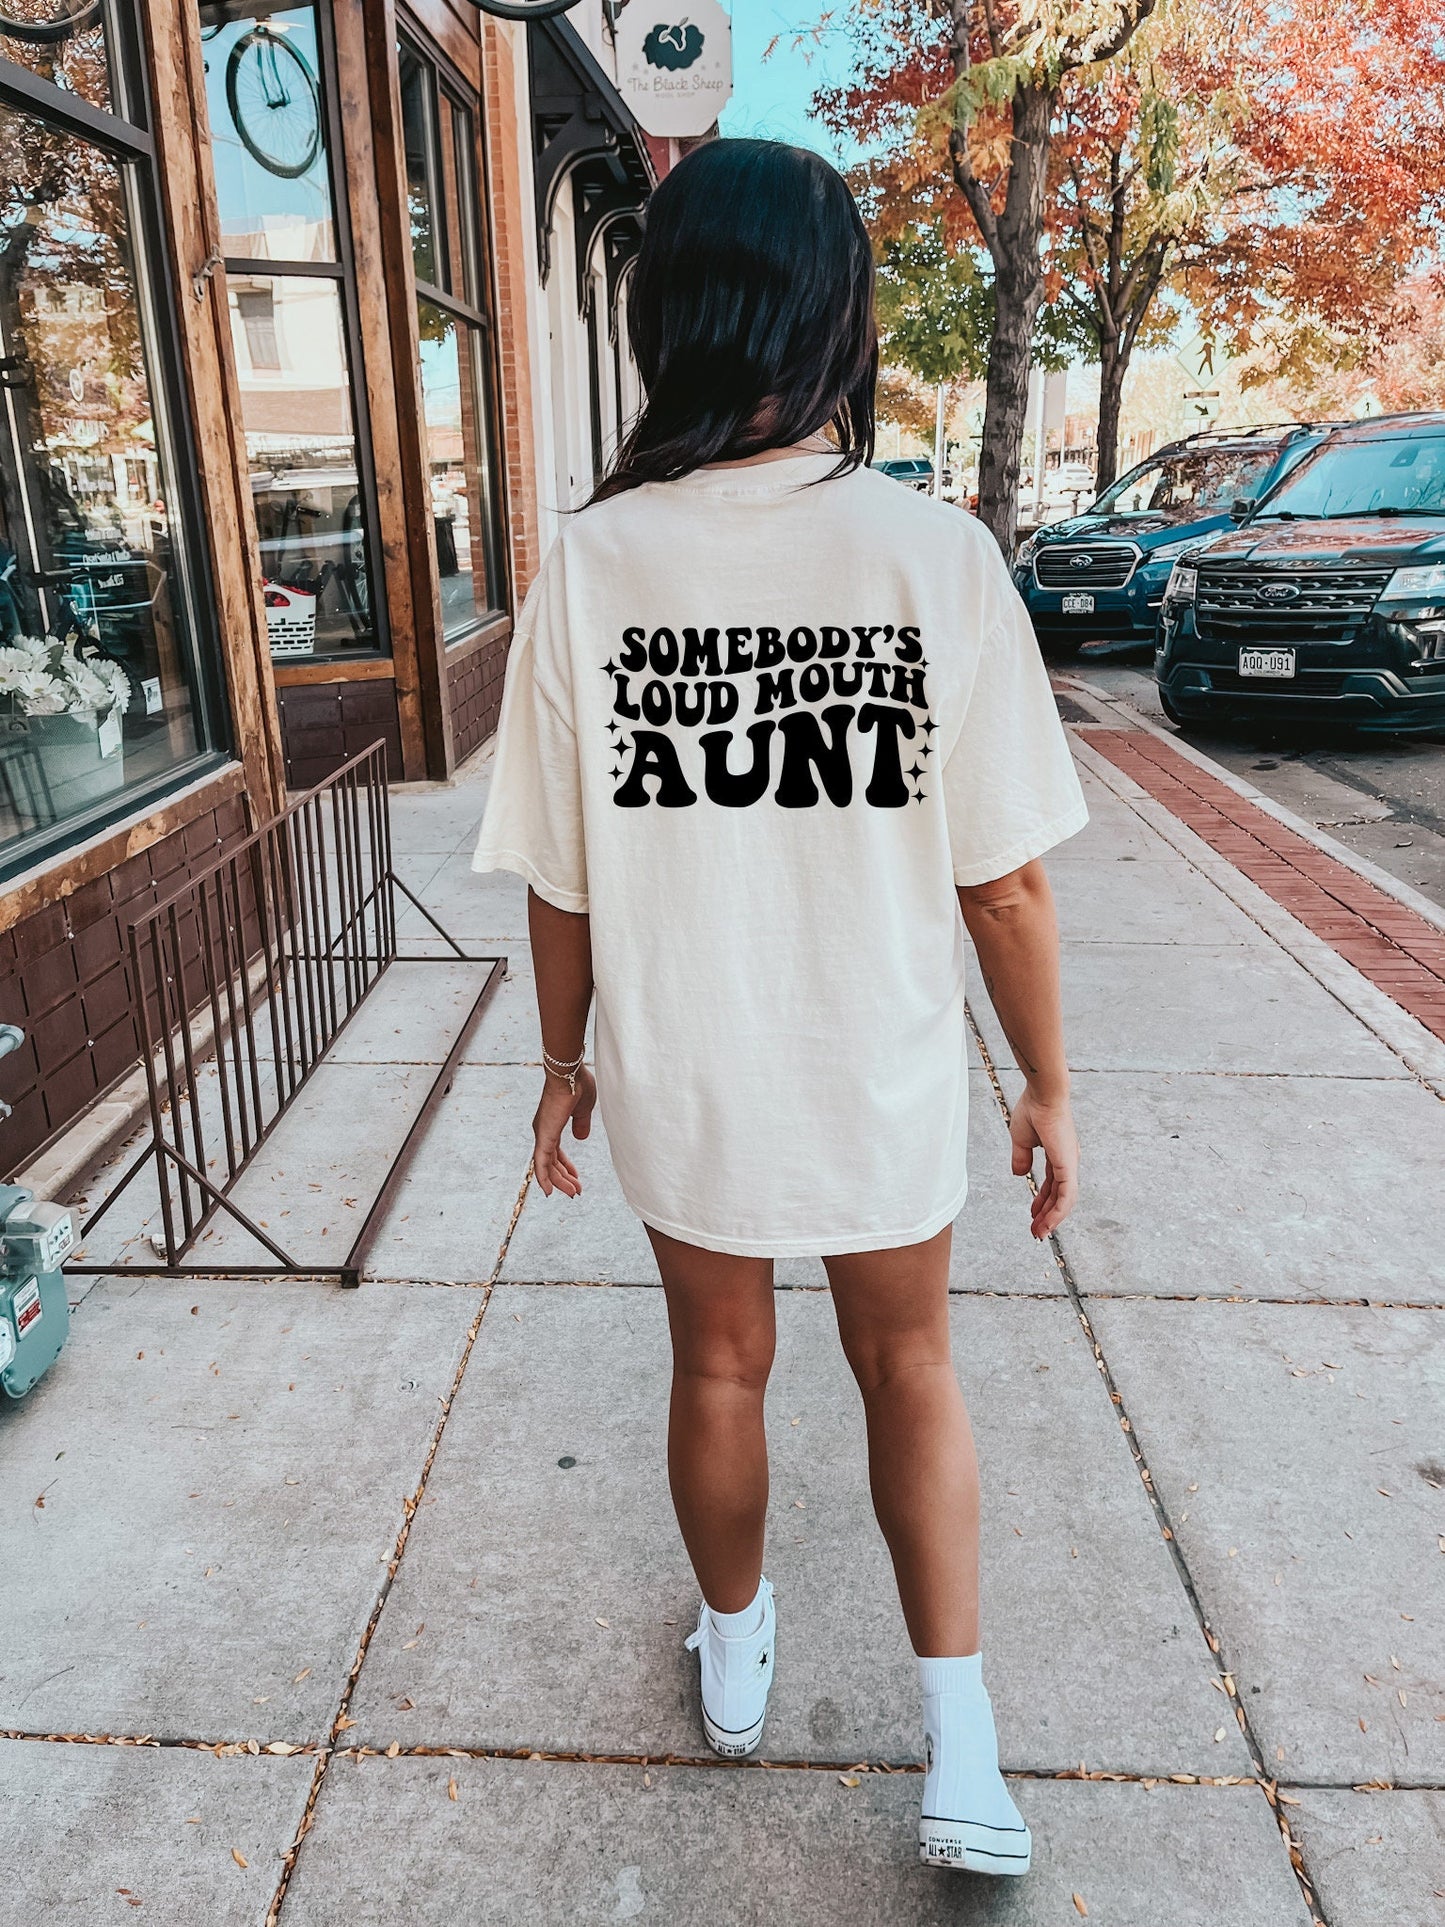 Somebody’s Loud Mouth Aunt Shirt Front and Back, Aunt Gift, Aunt Birthday Gift, Sister Gifts, Auntie Sweatshirt, Aunt Sweatshirt